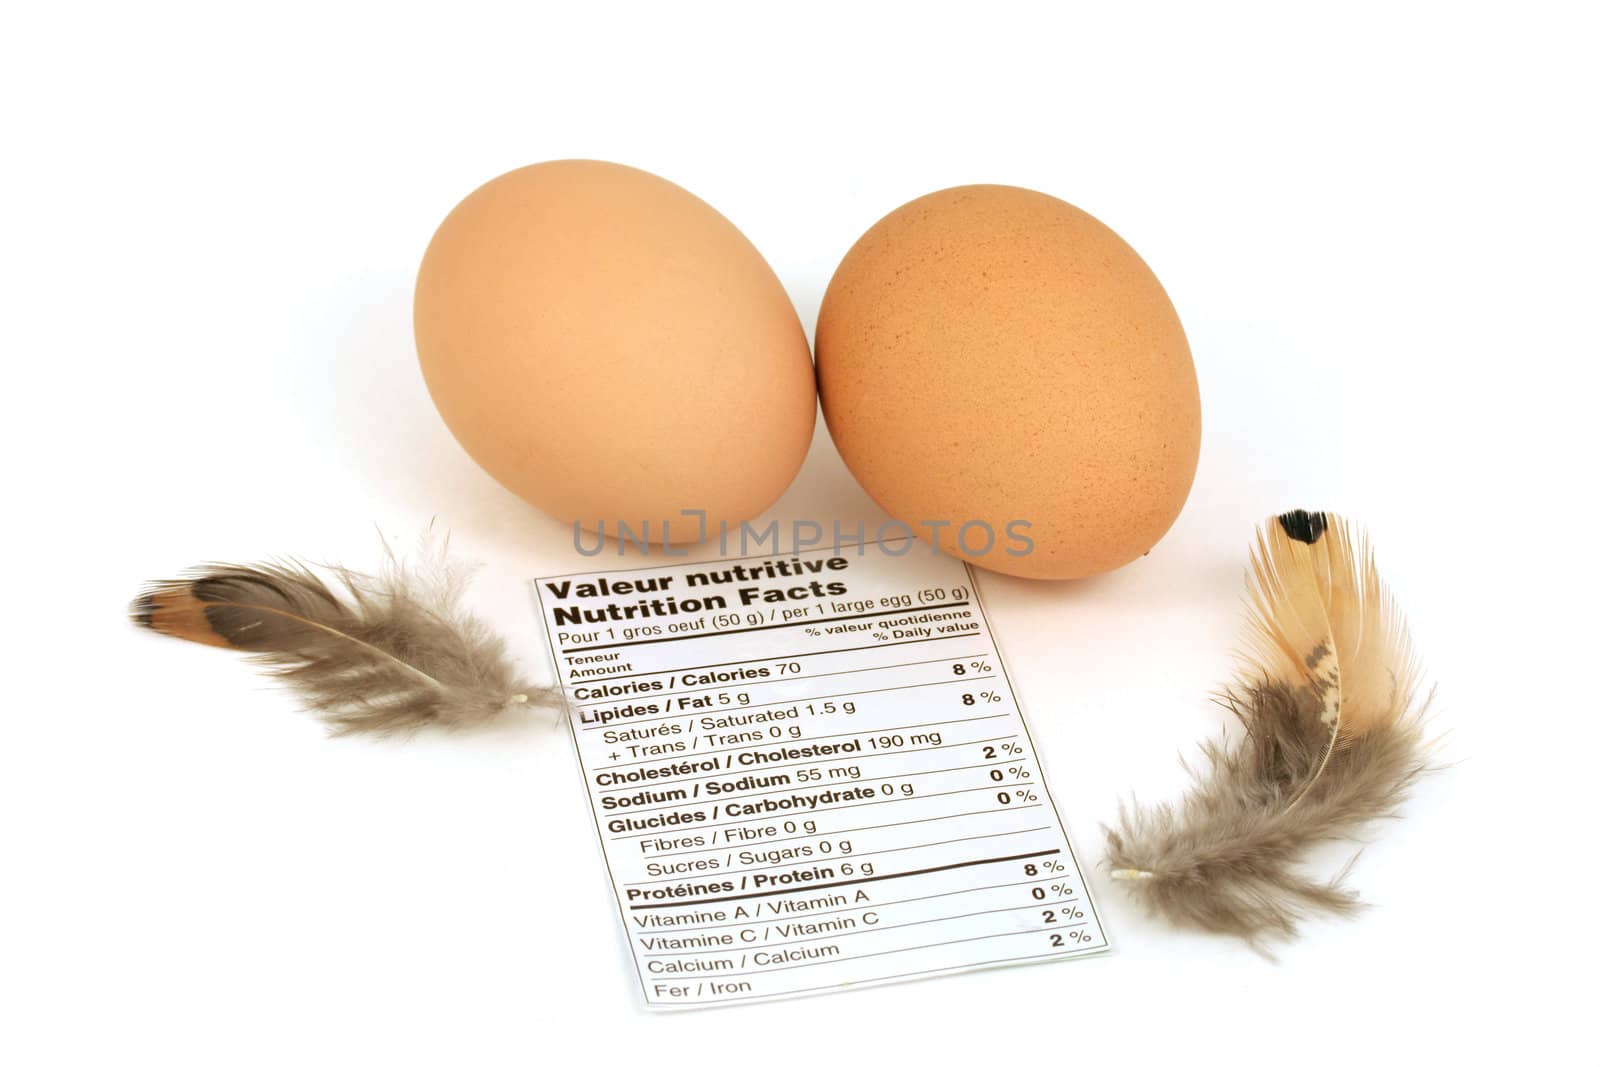 Egg nutrition facts by Hbak